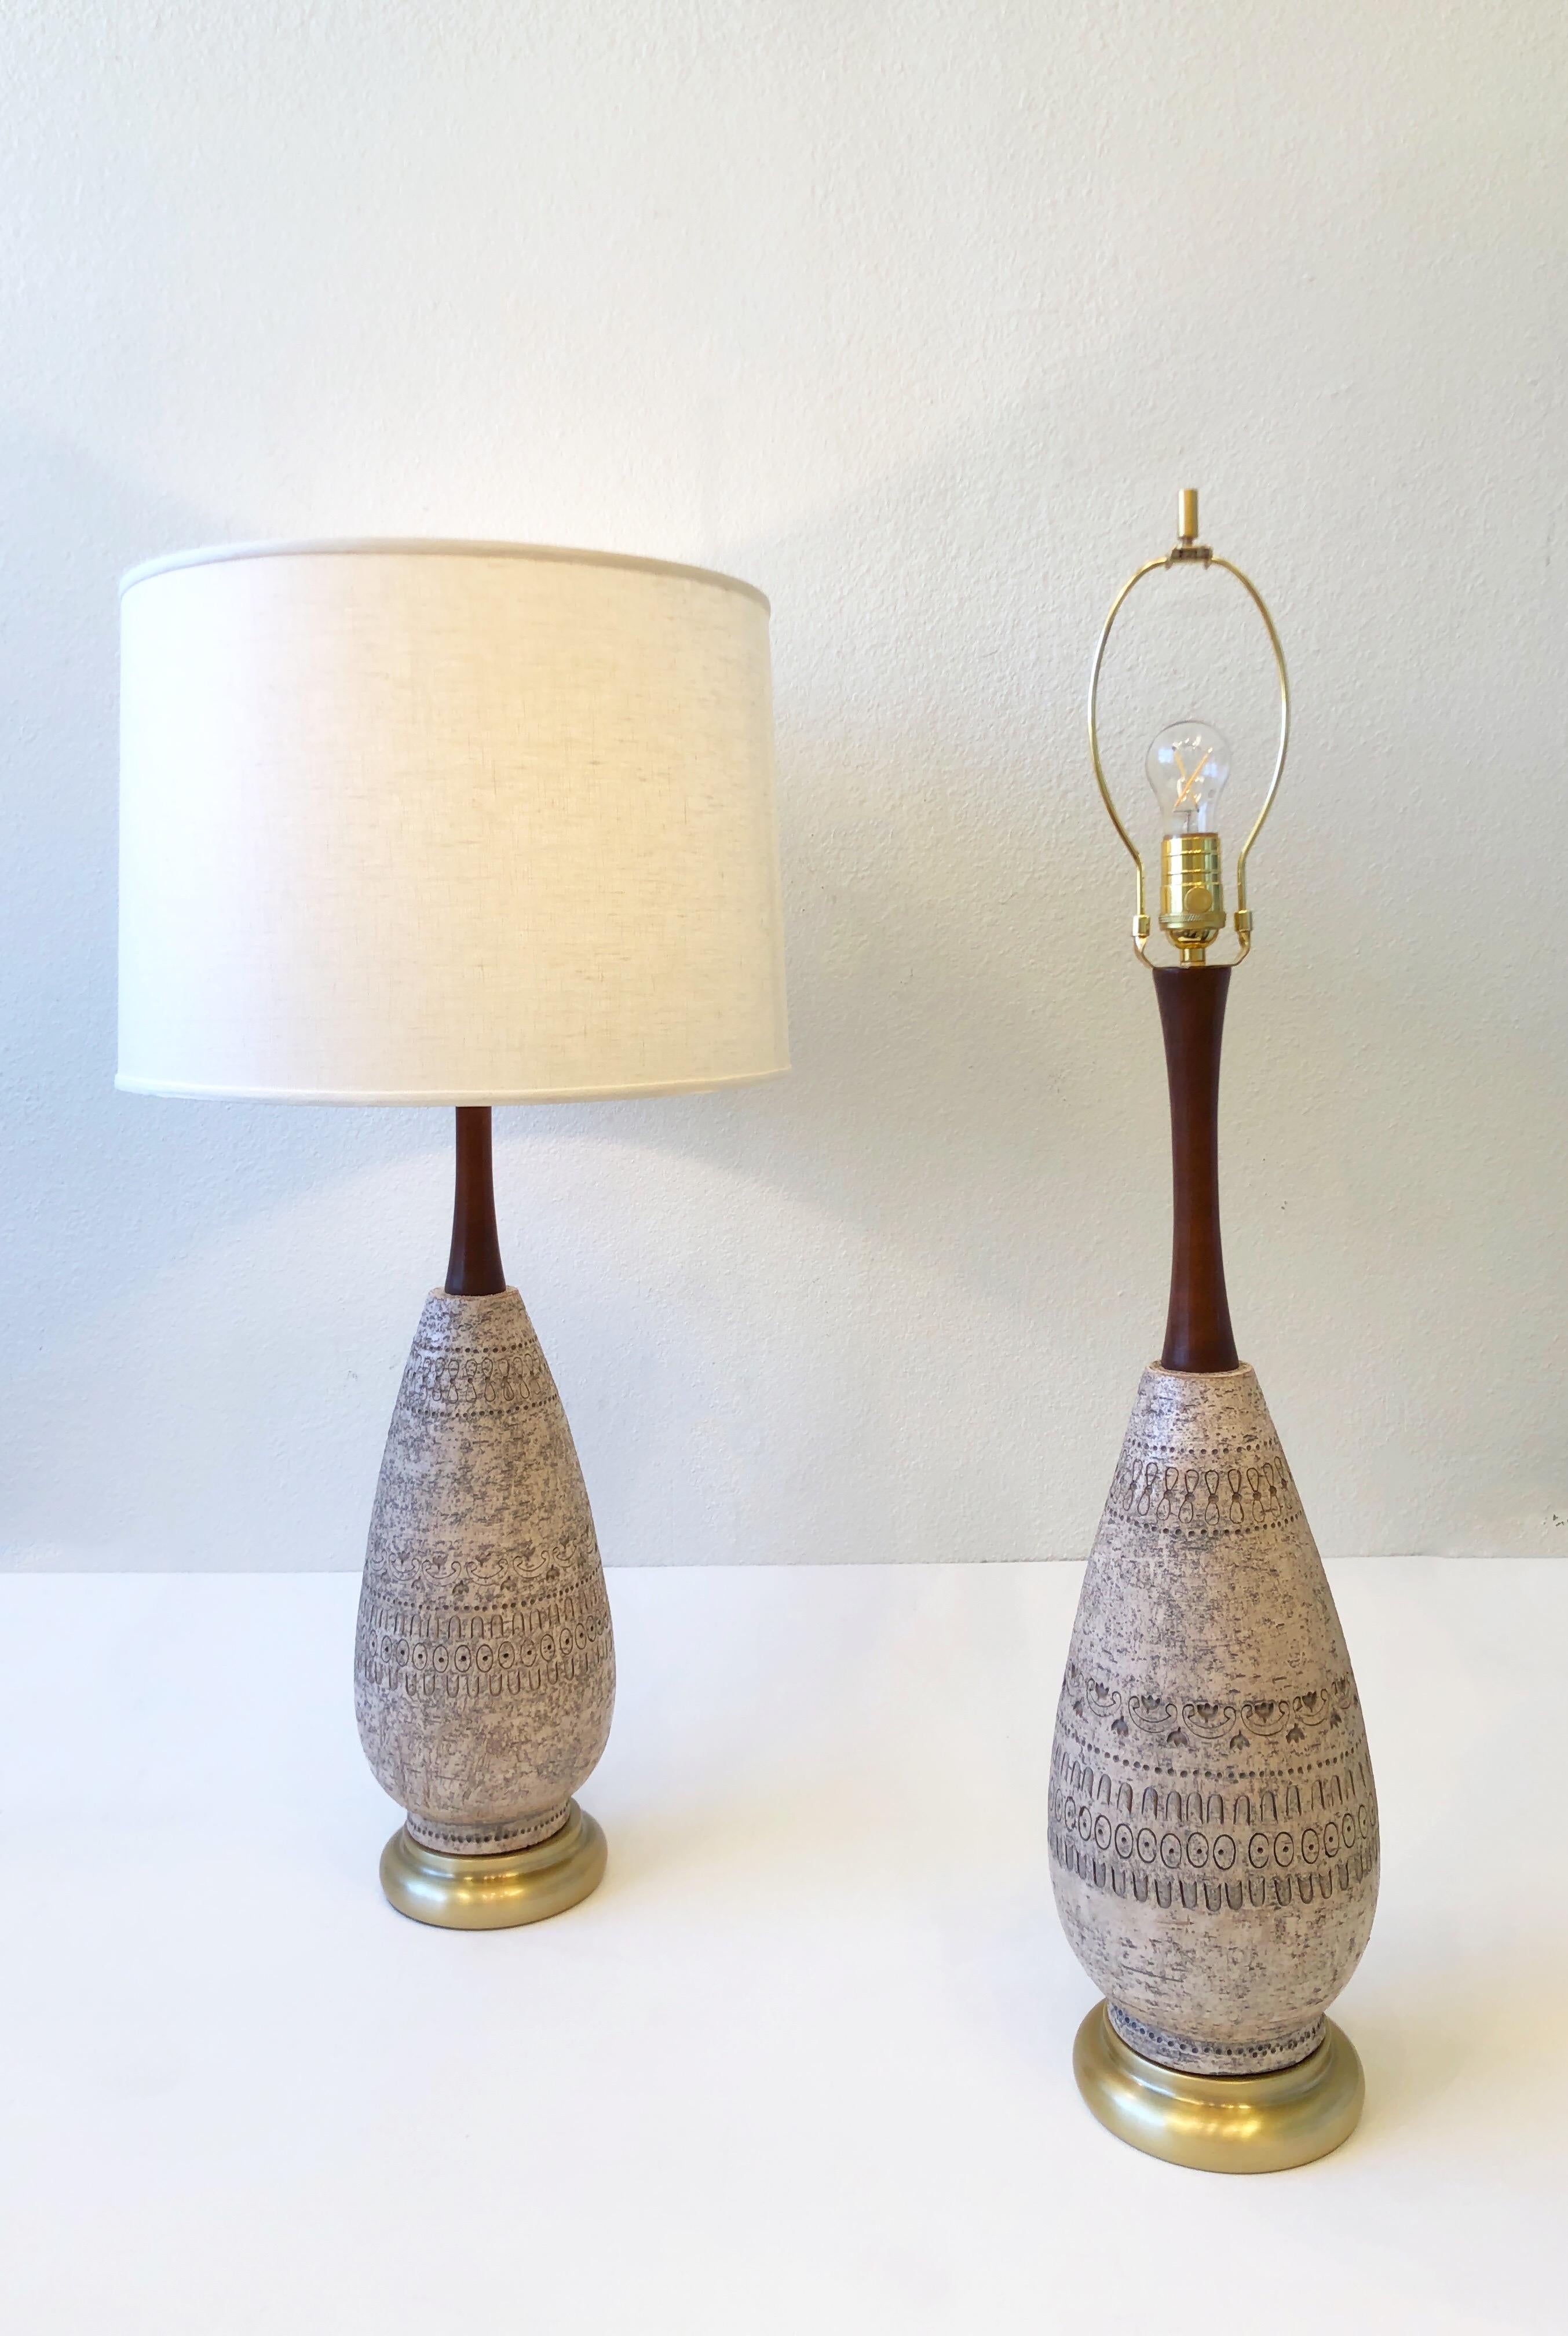 Mid-20th Century Italian Ceramic and Brass Pair of Table Lamps by Bitossi